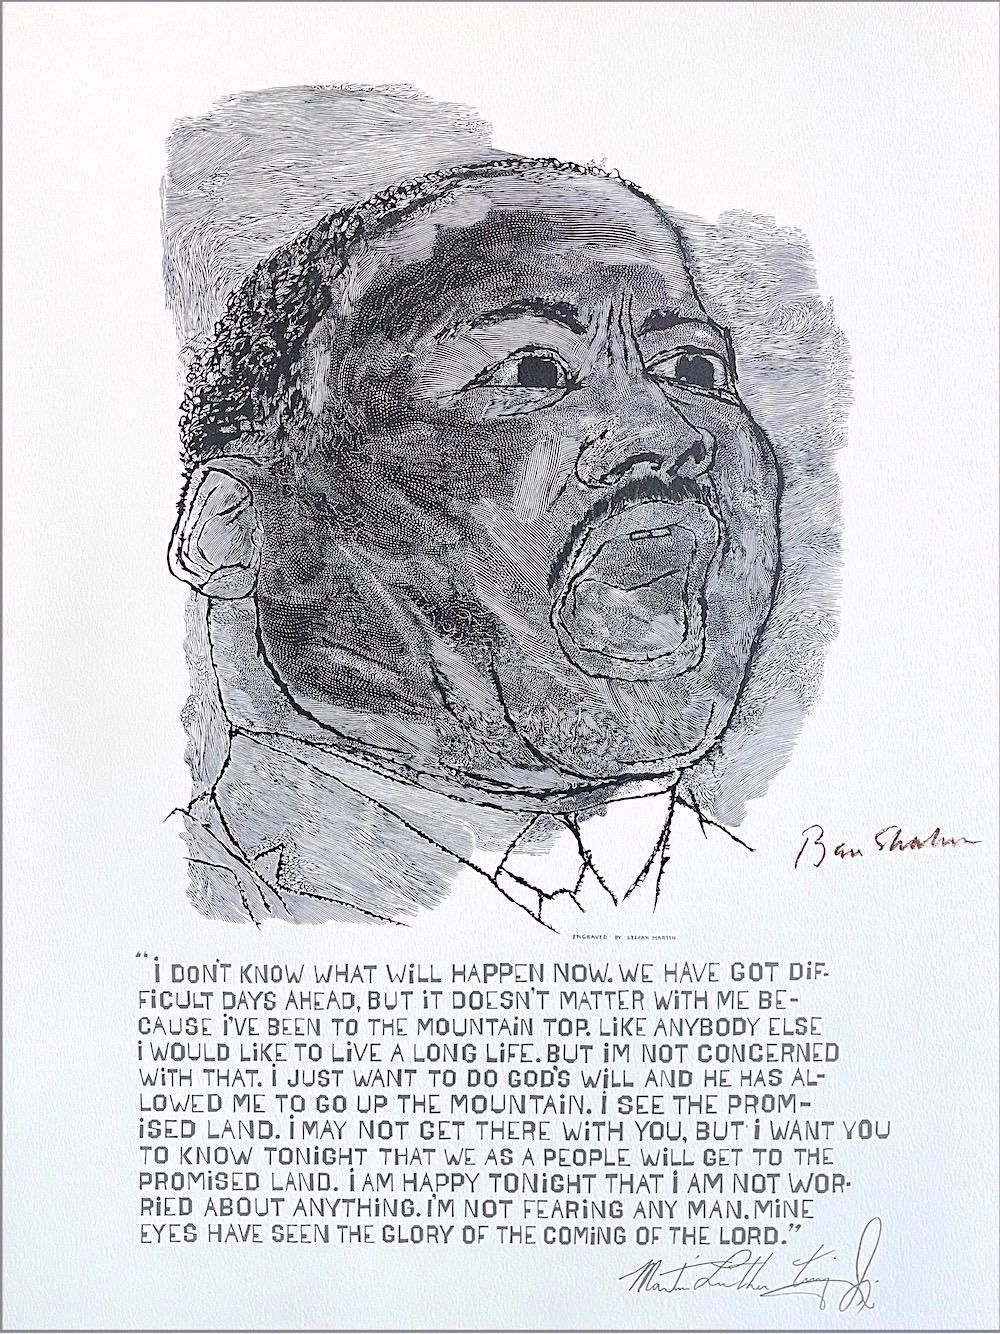 Martin Luther King Jr. I Have A Dream, Lithograph, Black Portrait, Civil Rights - Contemporary Print by Ben Shahn